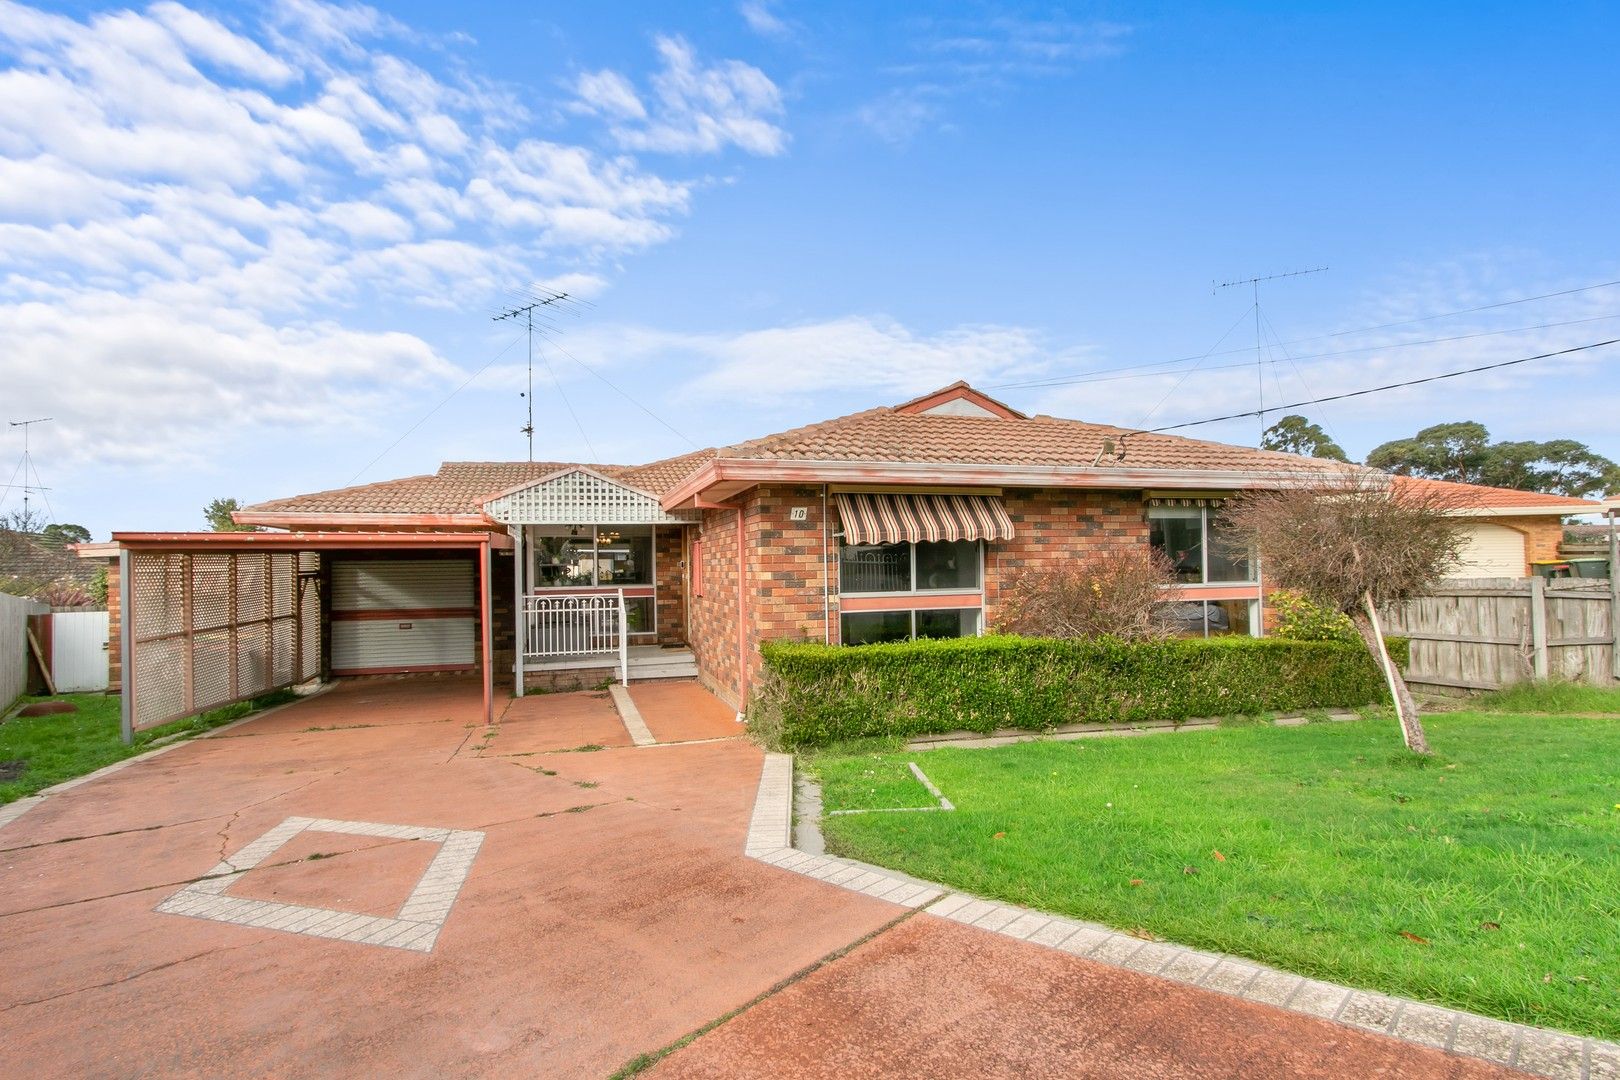 4 bedrooms House in 10 Wicks Cres MORWELL VIC, 3840